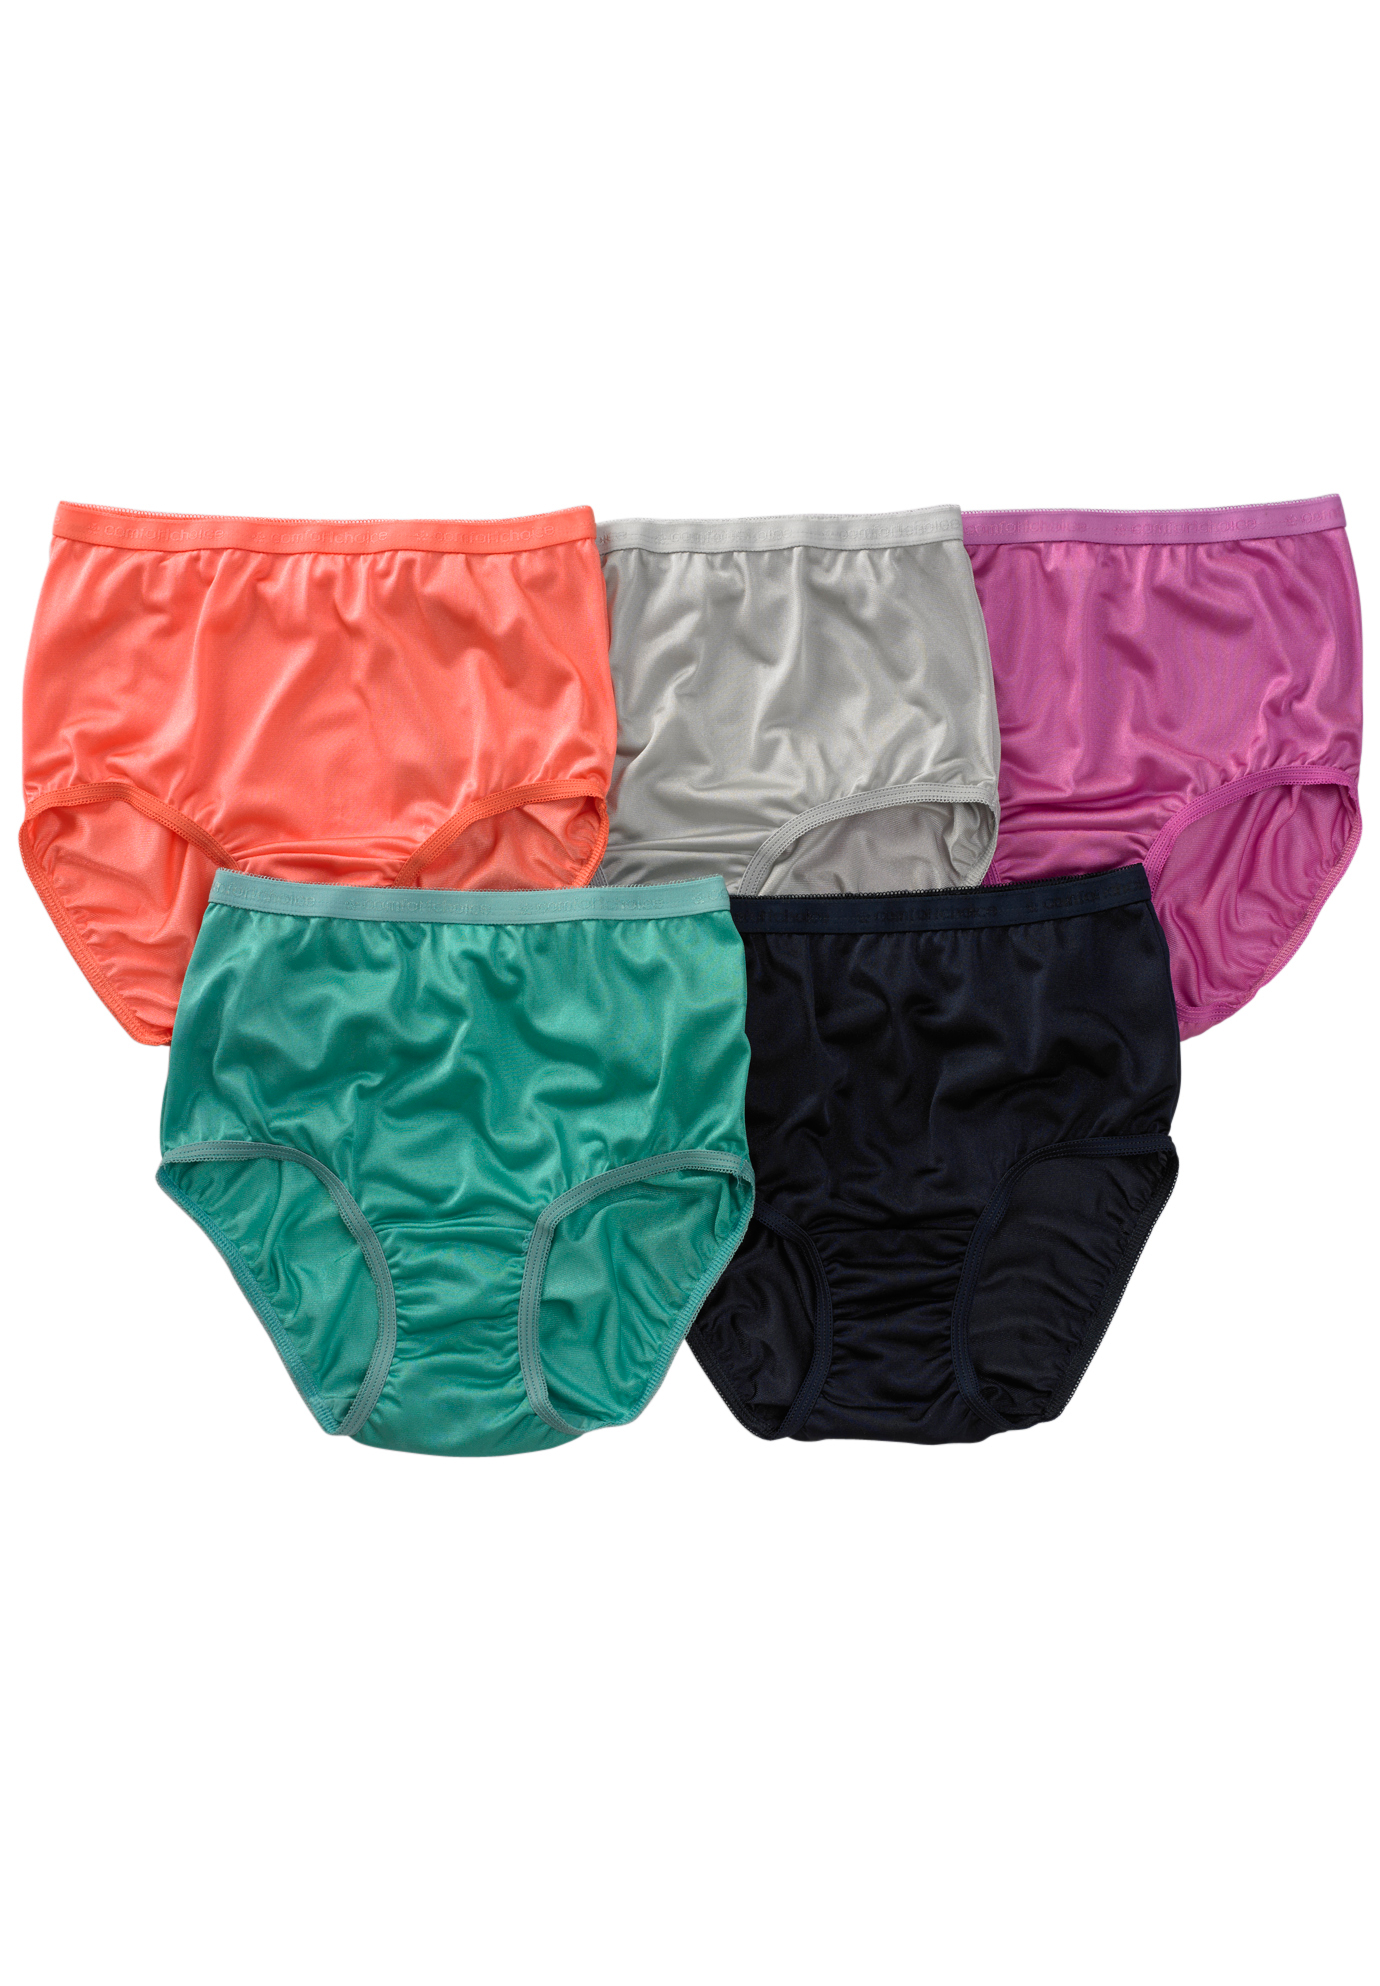 10 Pack Nylon Full Cut Brief By Comfort Choice® Plus Size Panties Jessica London 0149